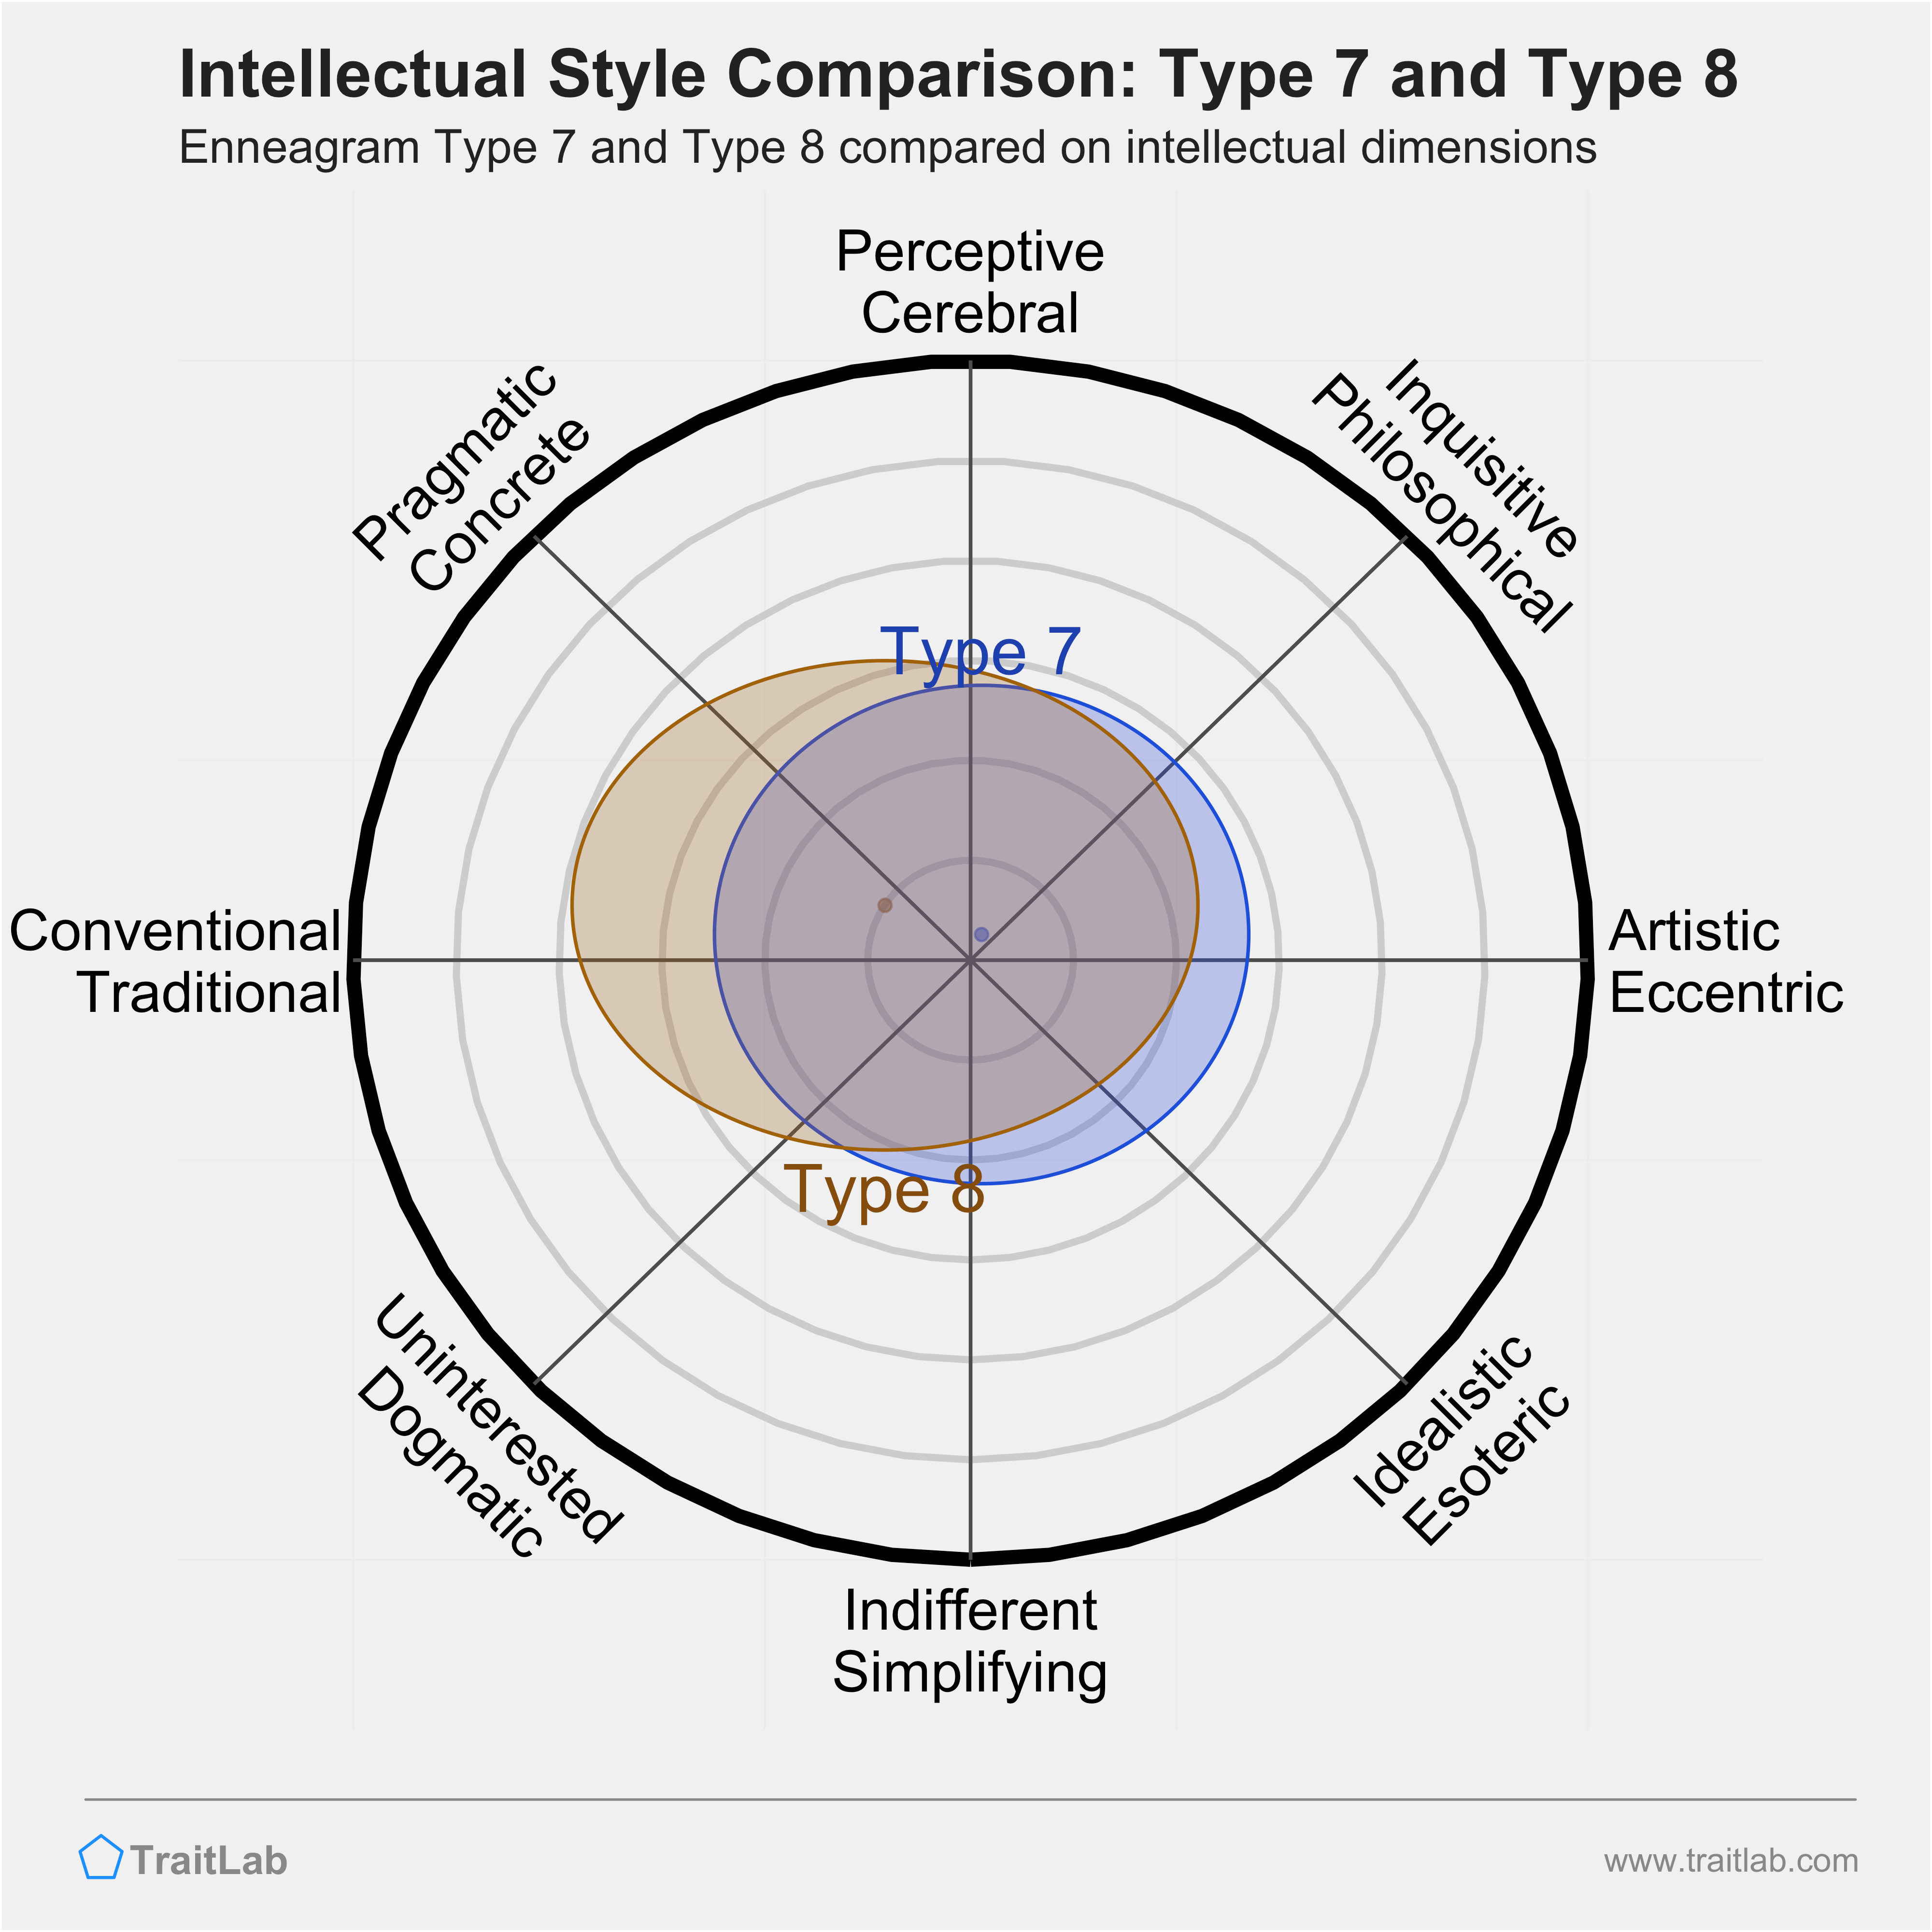 Type 7 and Type 8 comparison across intellectual dimensions